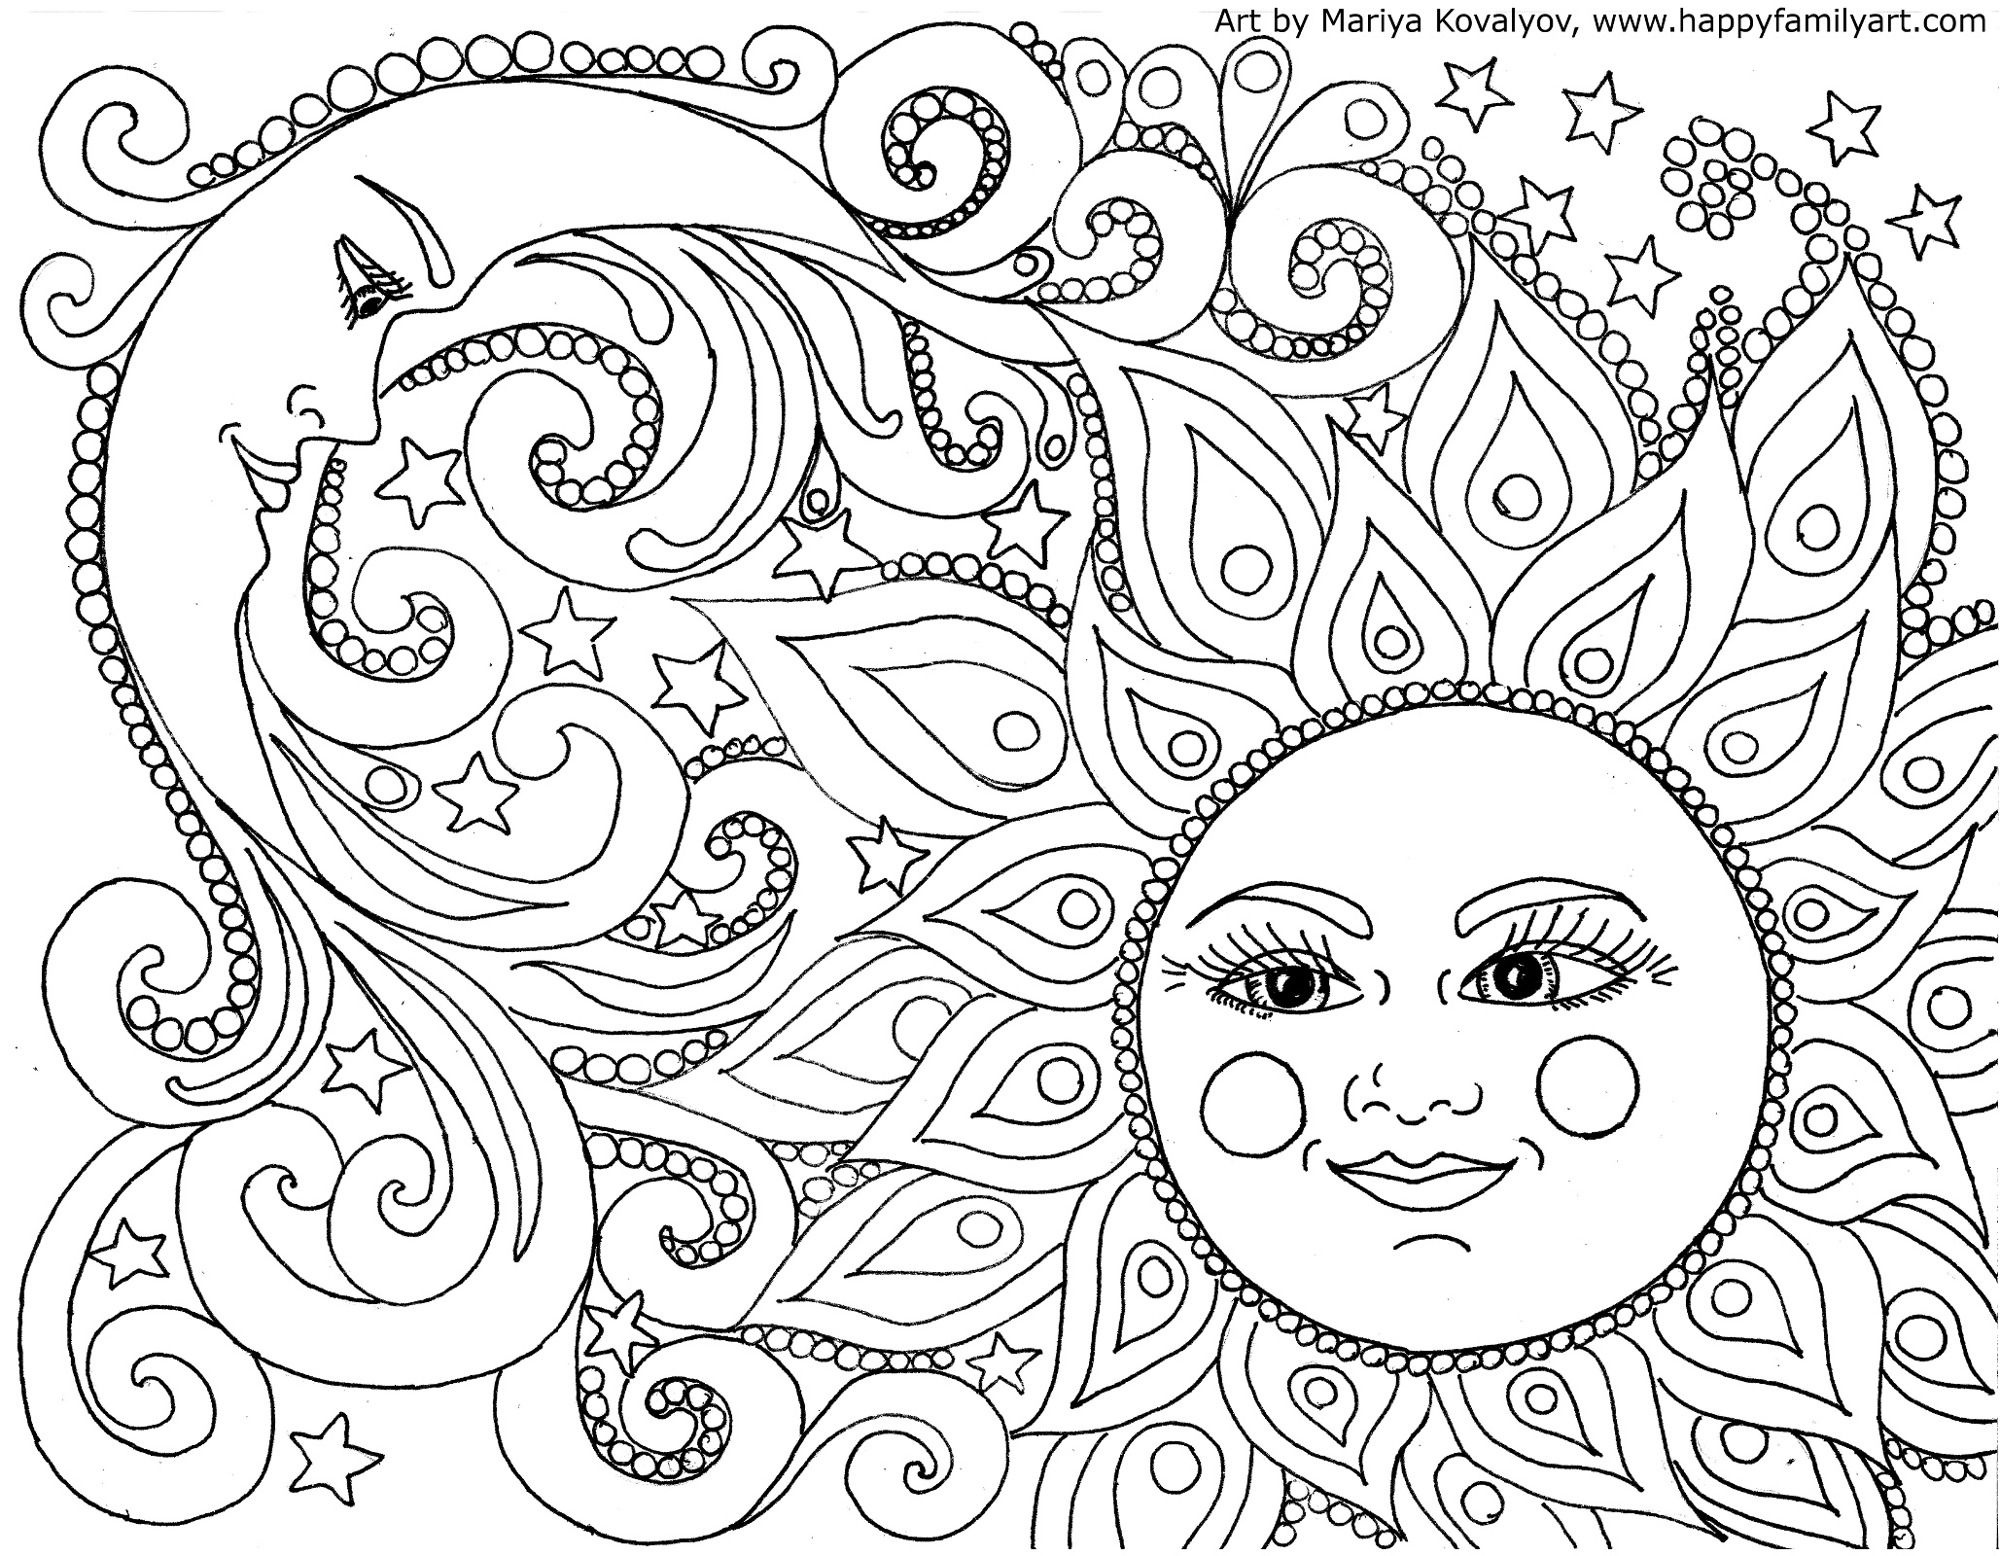 336 Simple Printable Hippie Coloring Pages for Adult